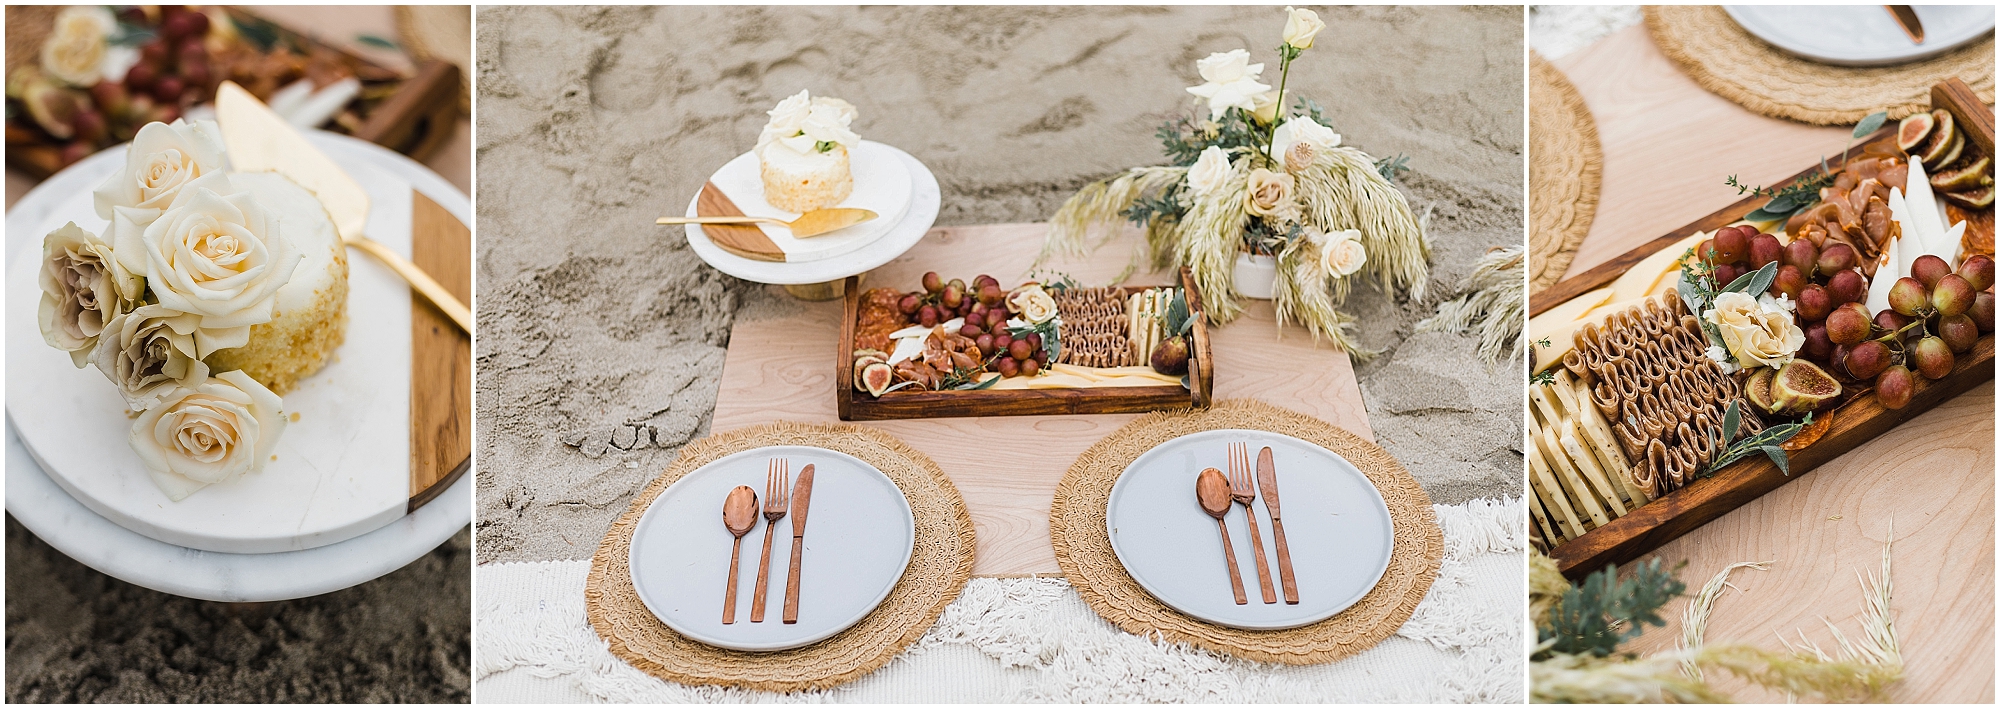 A romantic picnic on the beach featuring a charcuterie board, cake and champagne. A lovely sitting area with cream pillows, a white rug and beautiful florals decorate the sand for an intimate Oregon Coast elopement at Proposal Rock. | Erica Swantek Photography